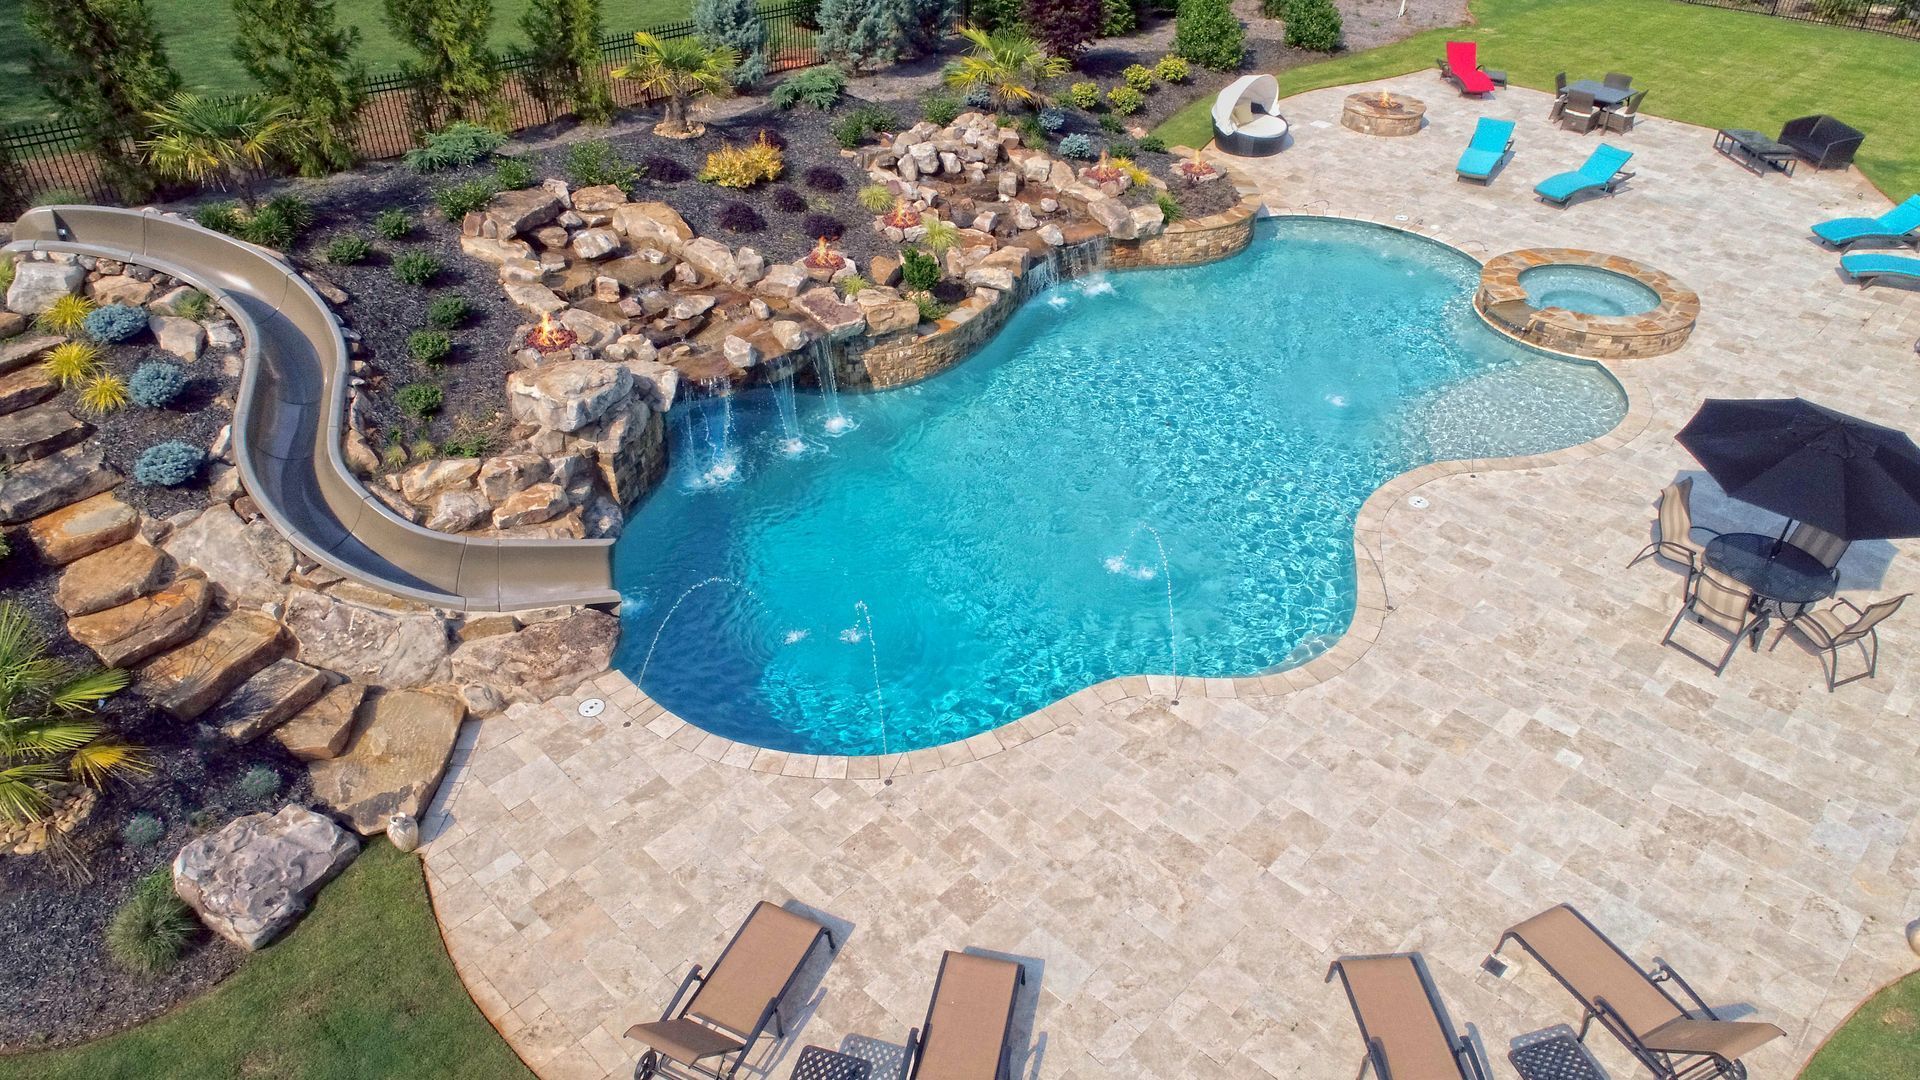 A large swimming pool with a slide in the backyard